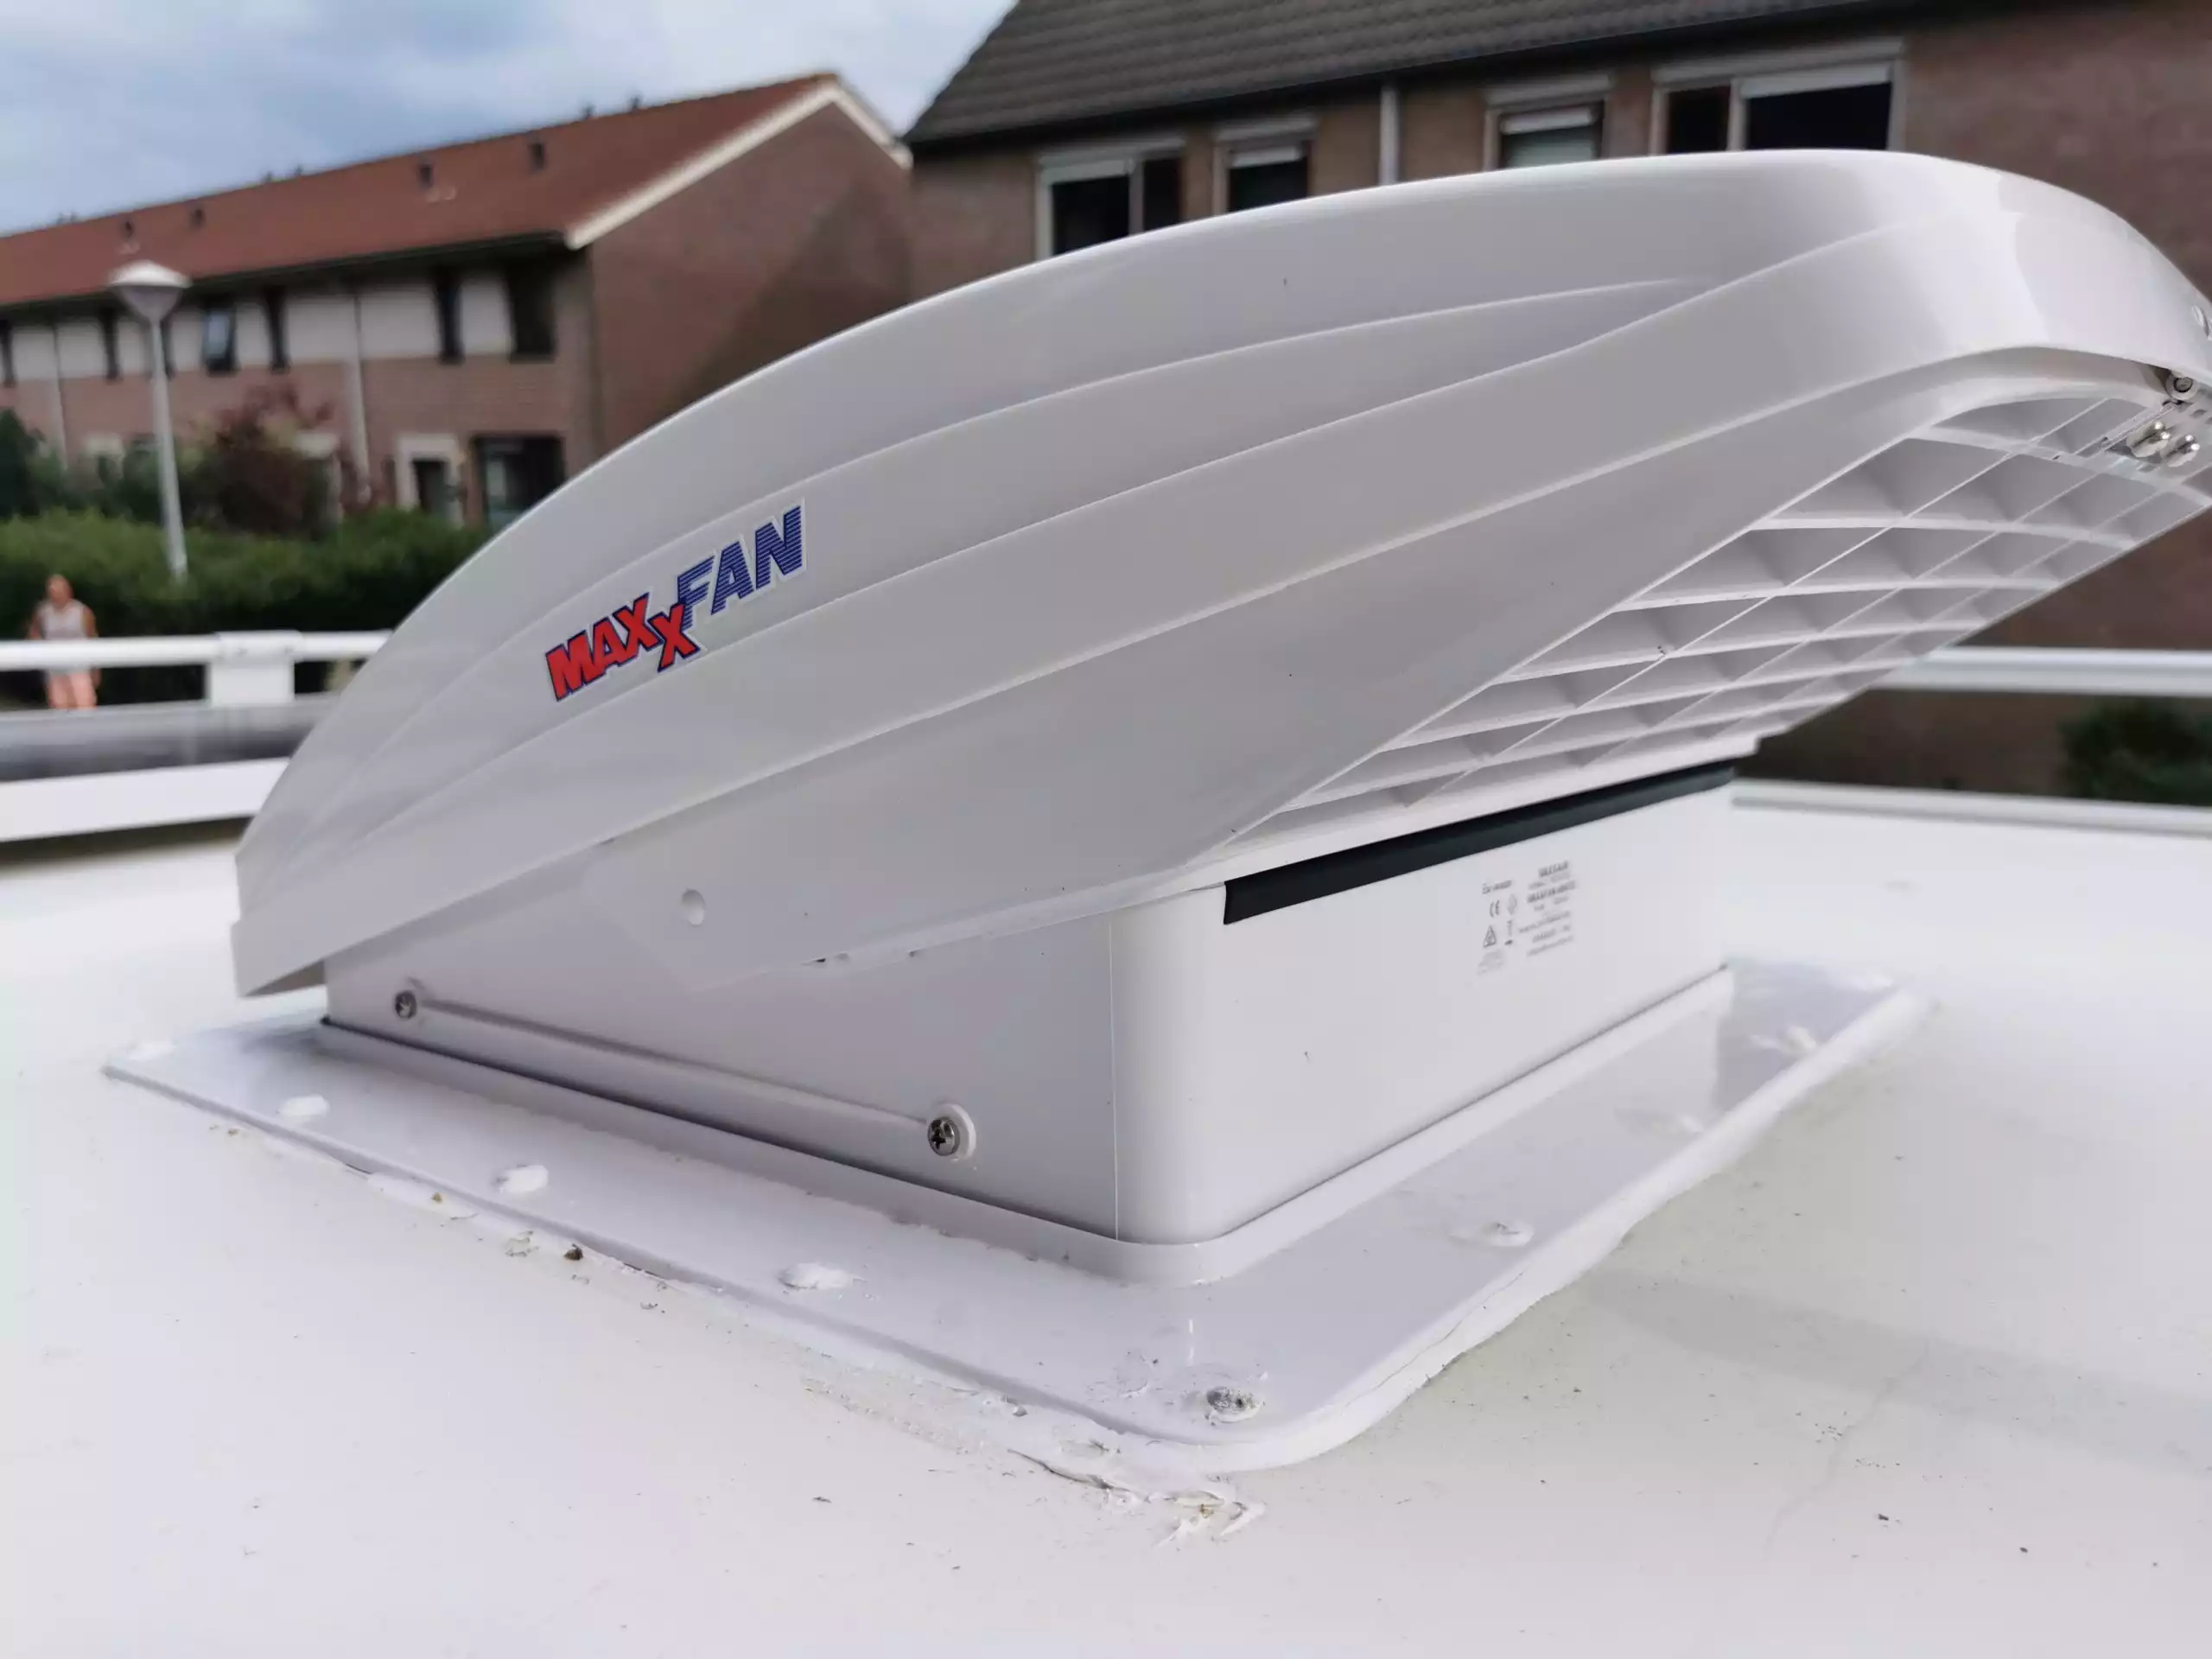 Maxxfan Deluxe | Roof hatch 40x40 cm with fan and remote control